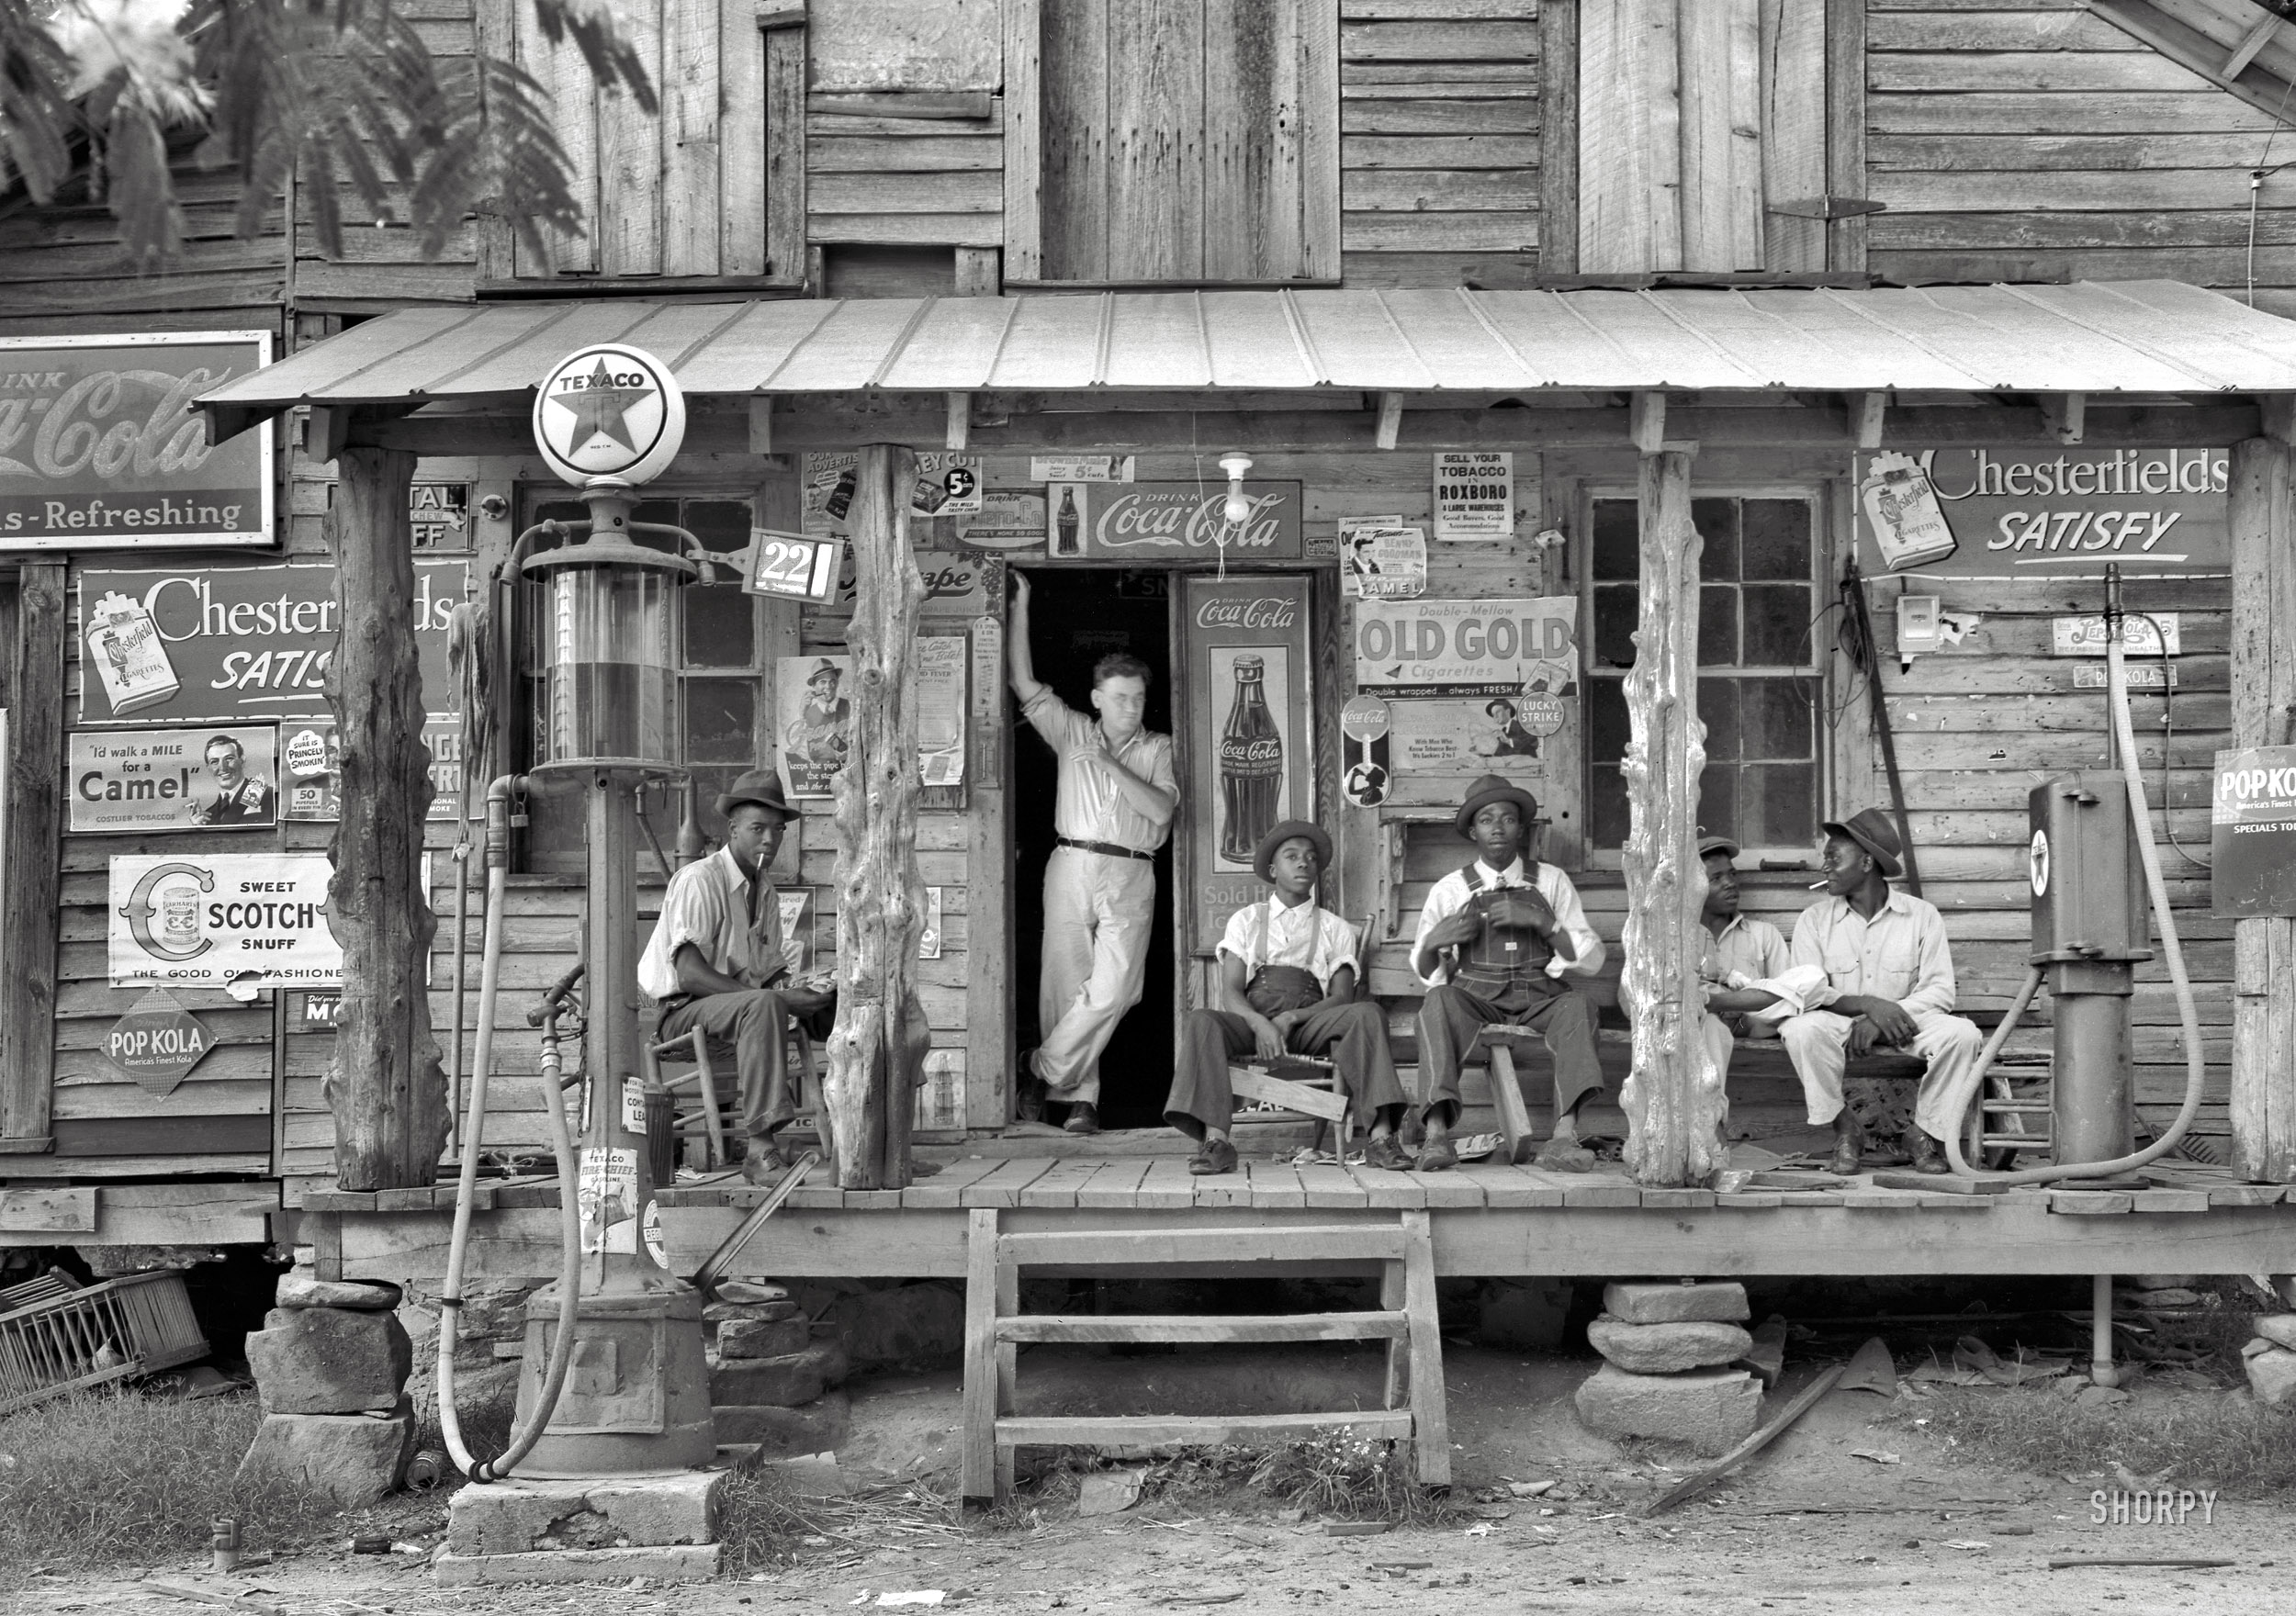 July 1939. Gordonton, North Carolina. "Country store on dirt road. Sunday afternoon. Note kerosene pump on the right and the gasoline pump on the left. Rough, unfinished timber posts have been used as supports for porch roof. Negro men sitting on the porch. Brother of store owner stands in doorway." Our second look at this establishment, seen here two years ago. 4x5 nitrate negative by Dorothea Lange for the Farm Security Administration. View full size.